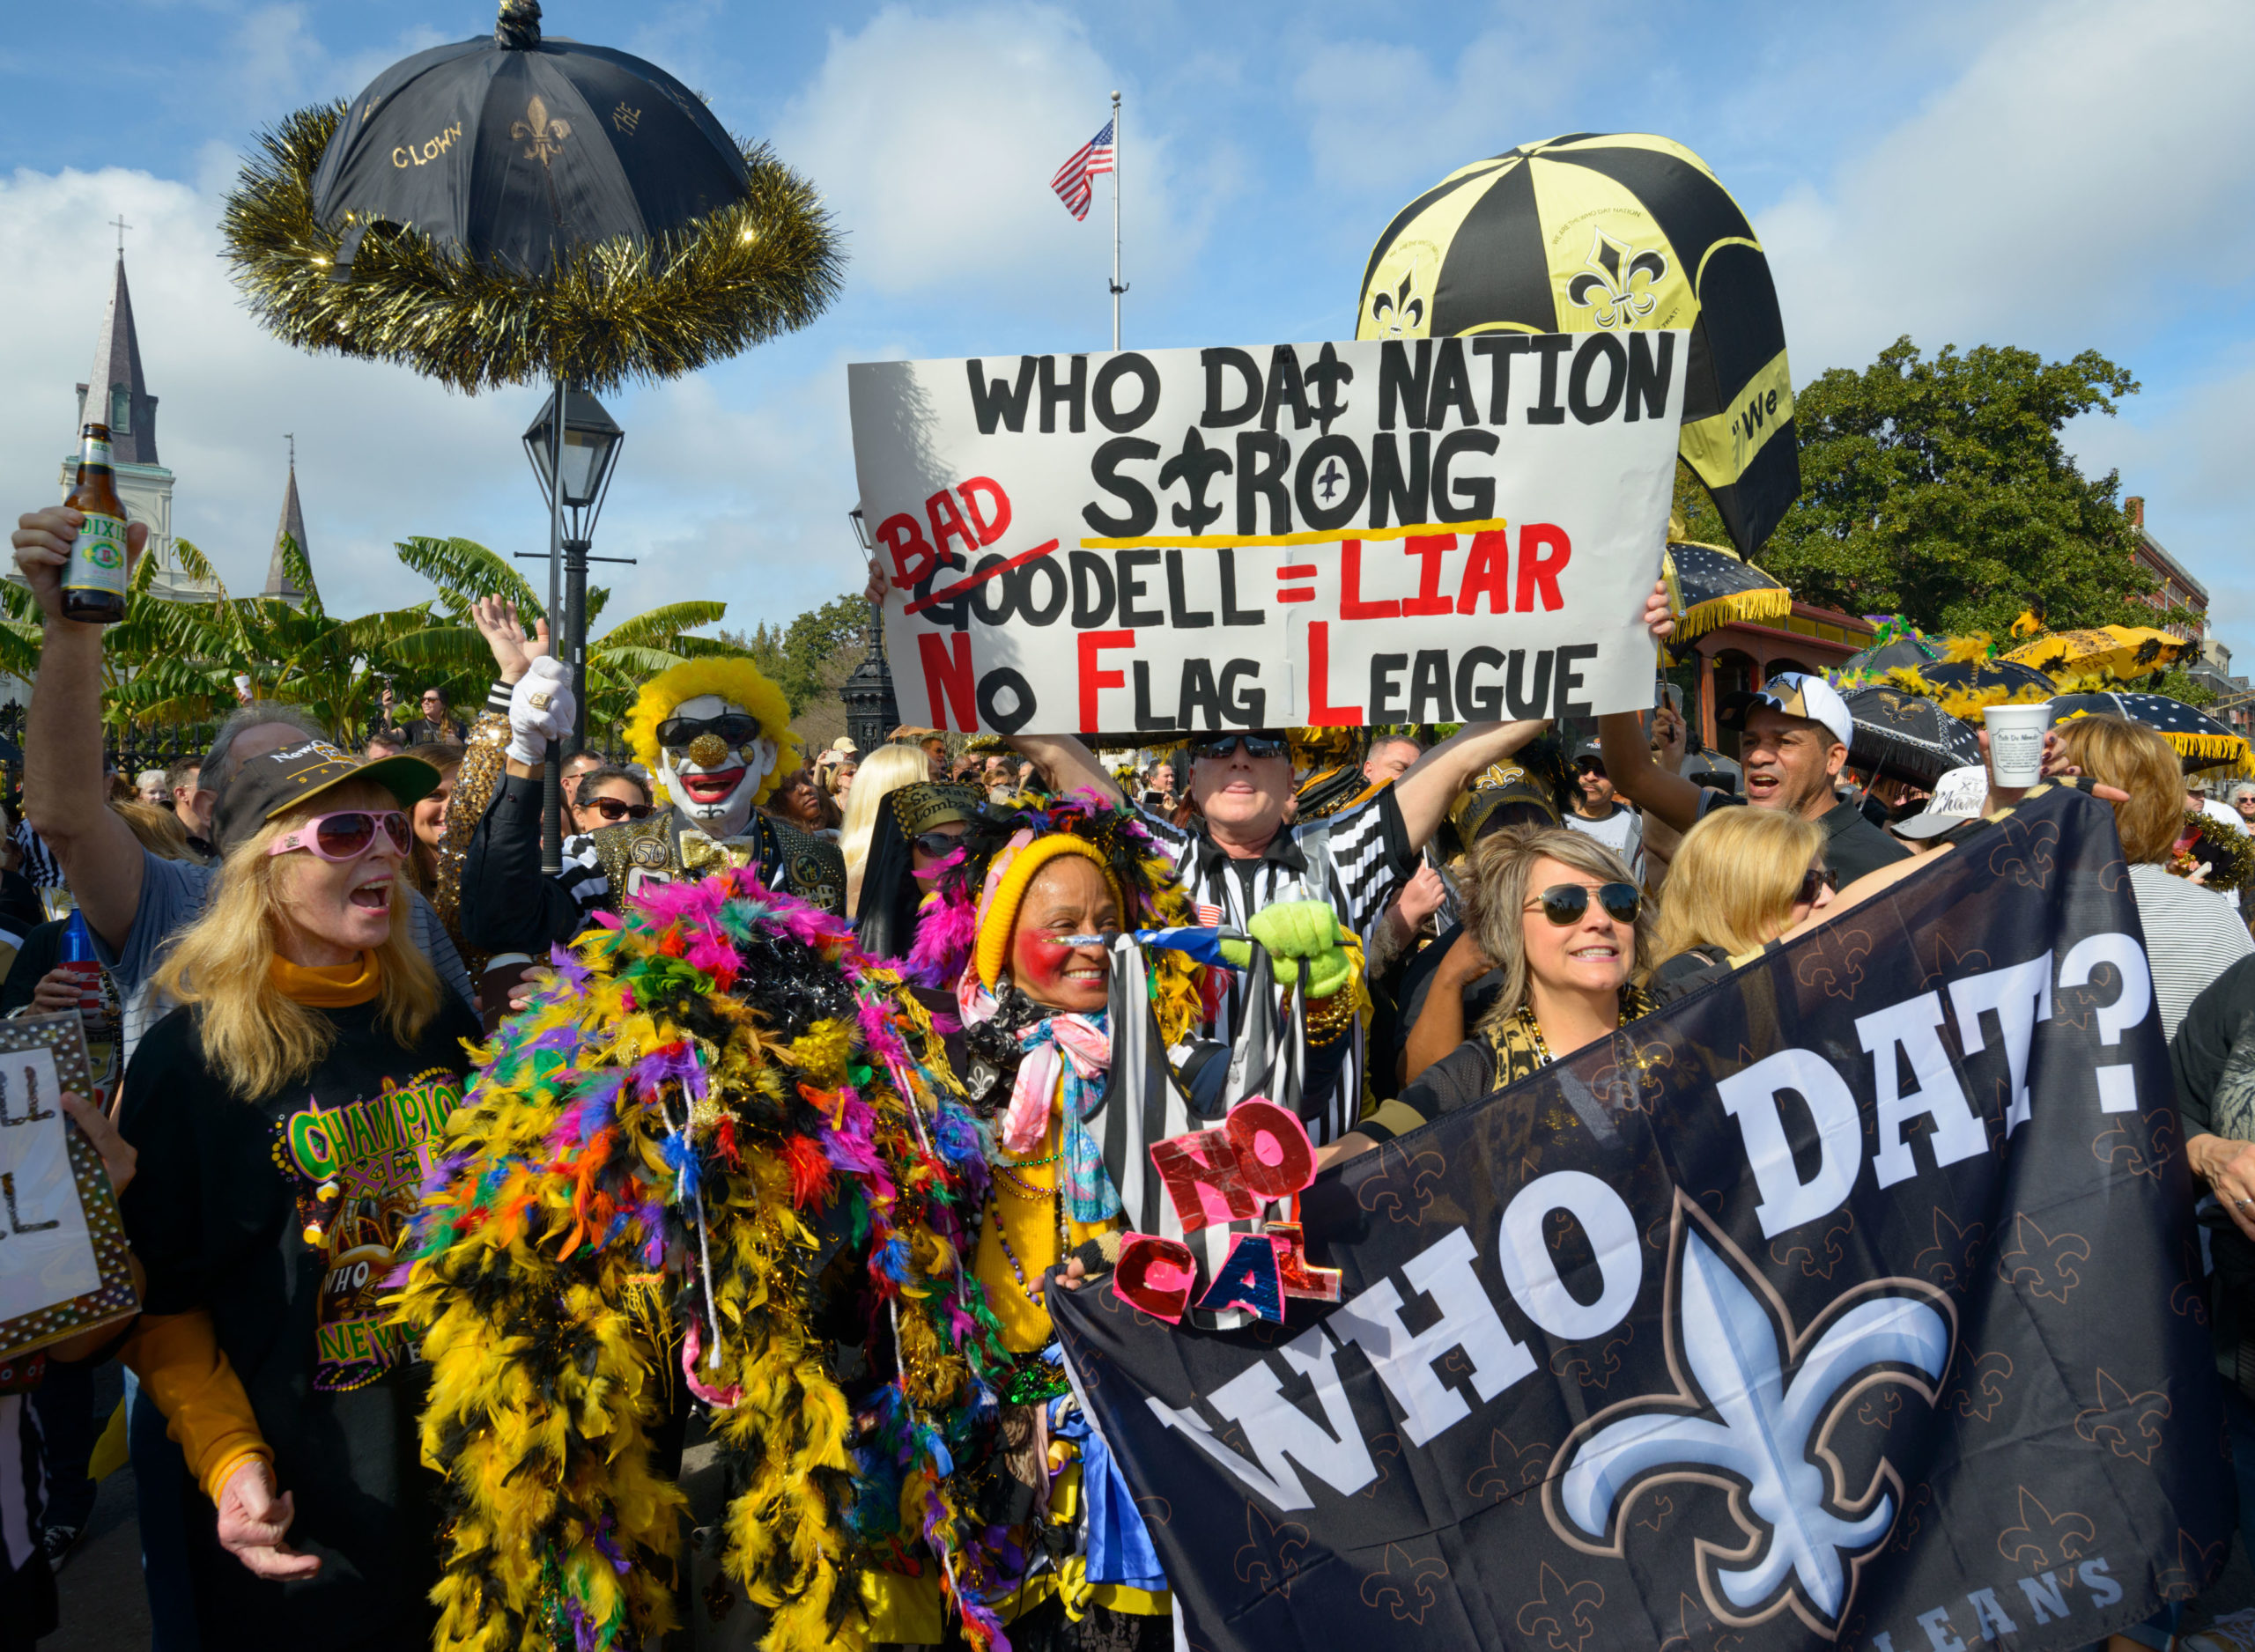 New Orleans Saints fans take part in the Blackout and Gold Second Line Parade, Cheated but Not Defeated, in the French Quarter in New Orleans, La. Sunday, Feb. 3, 2019. The parade protested the pass interference and helmet to helmet hits that were not called in the Saints loss in the NFC Championship to the Los Angeles Rams that NFL later admitted should have been called. The parade was held on Super Bowl Sunday with some fans call for a boycott and blackout of the broadcast of the game Sunday. Photo by Matthew Hinton